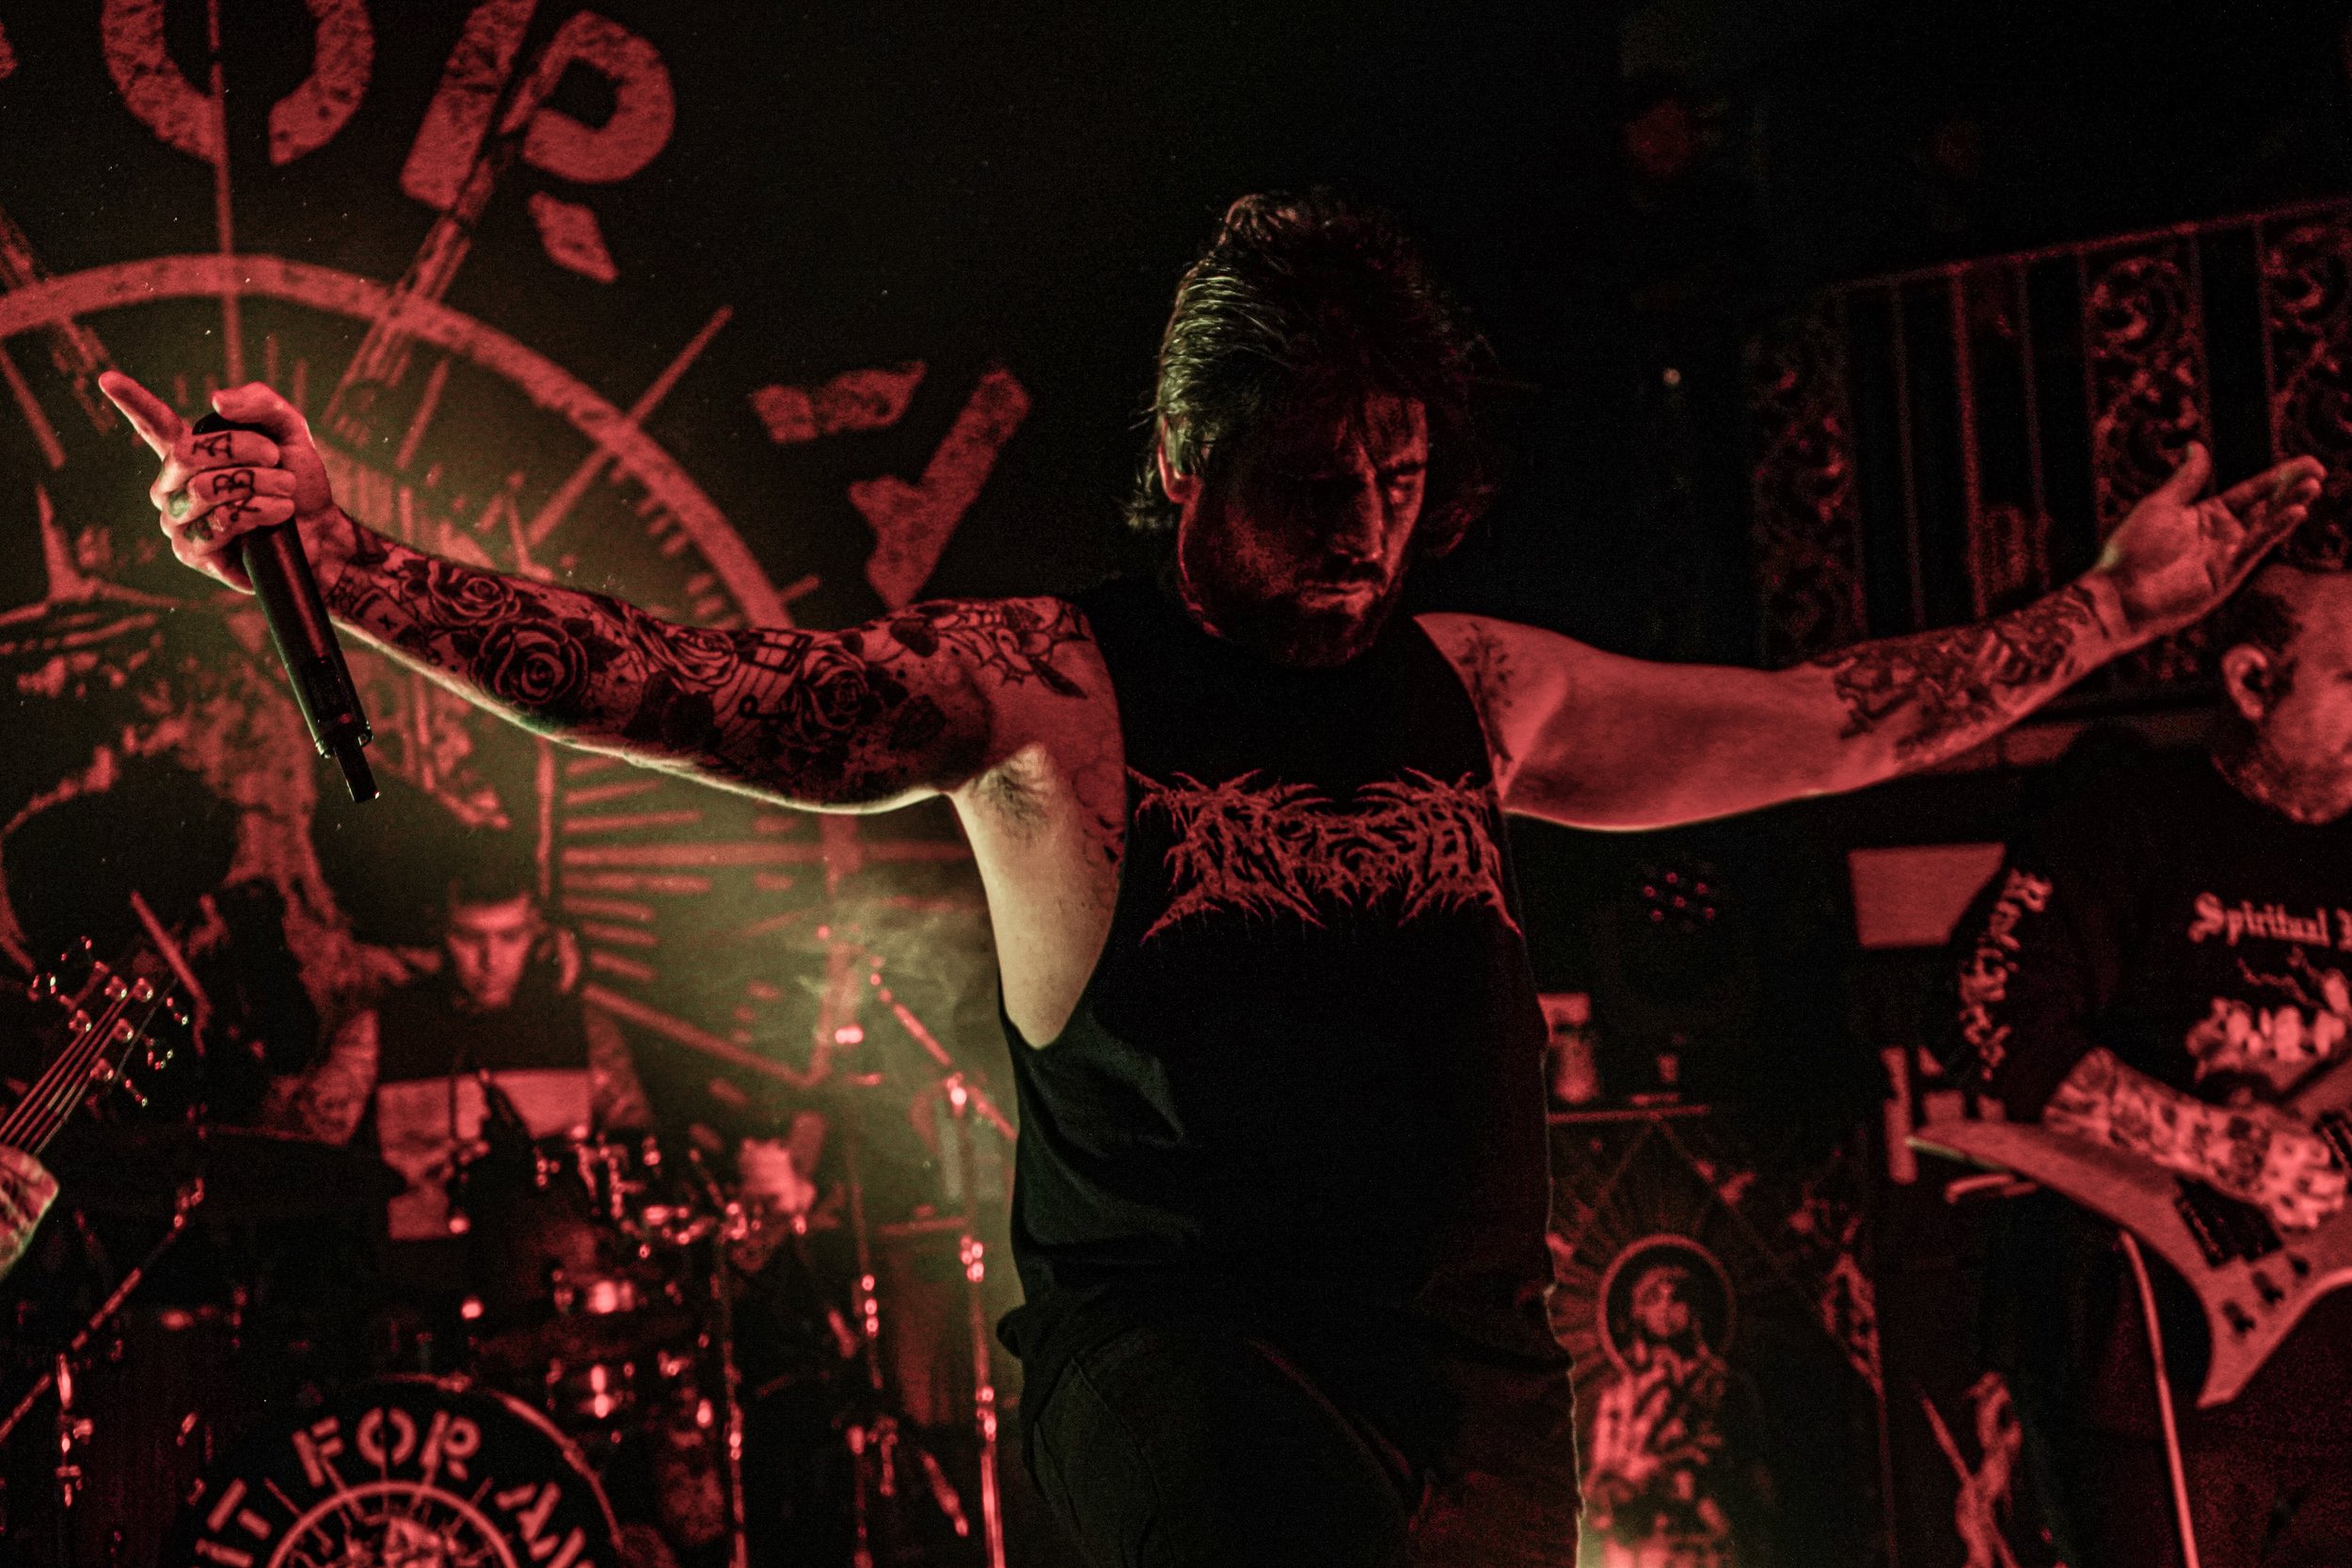 Fit For An Autopsy at The Masquerade